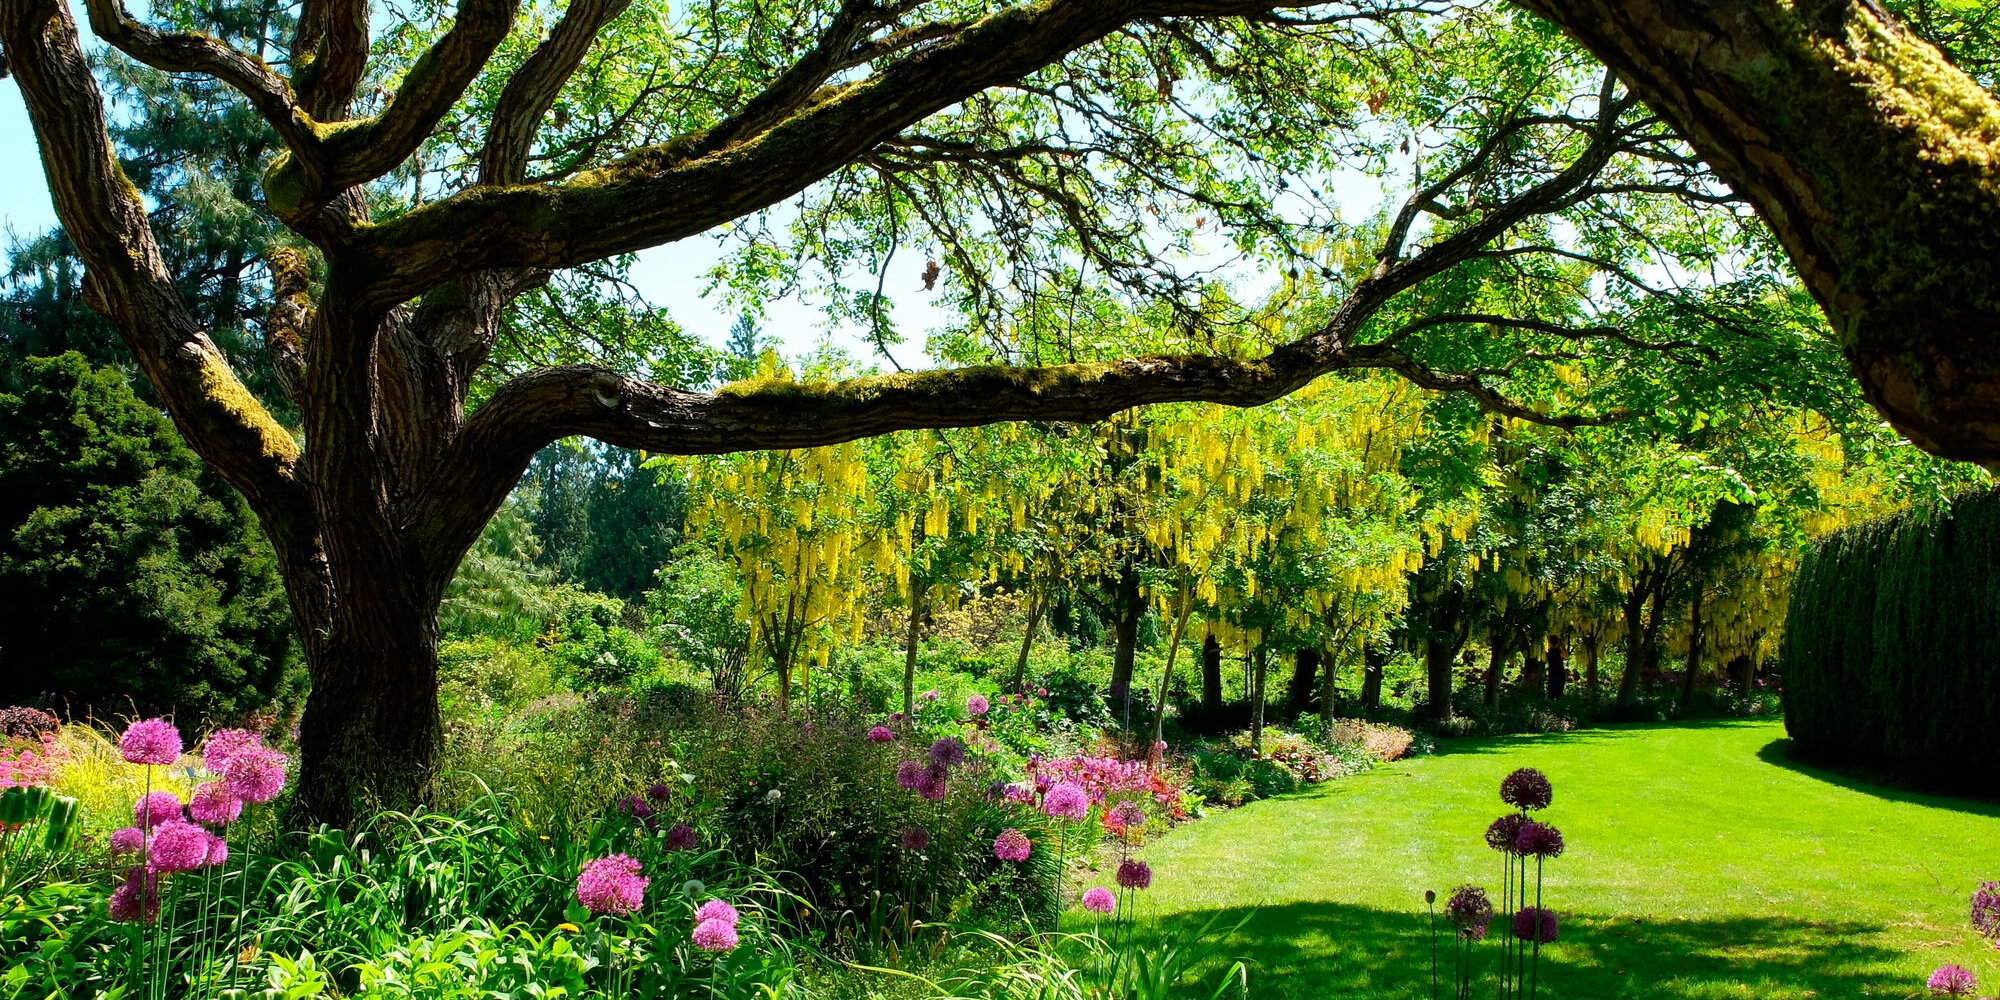 Sunny day looking through tree branches over a bright green lawn surrounded by colourful flowers